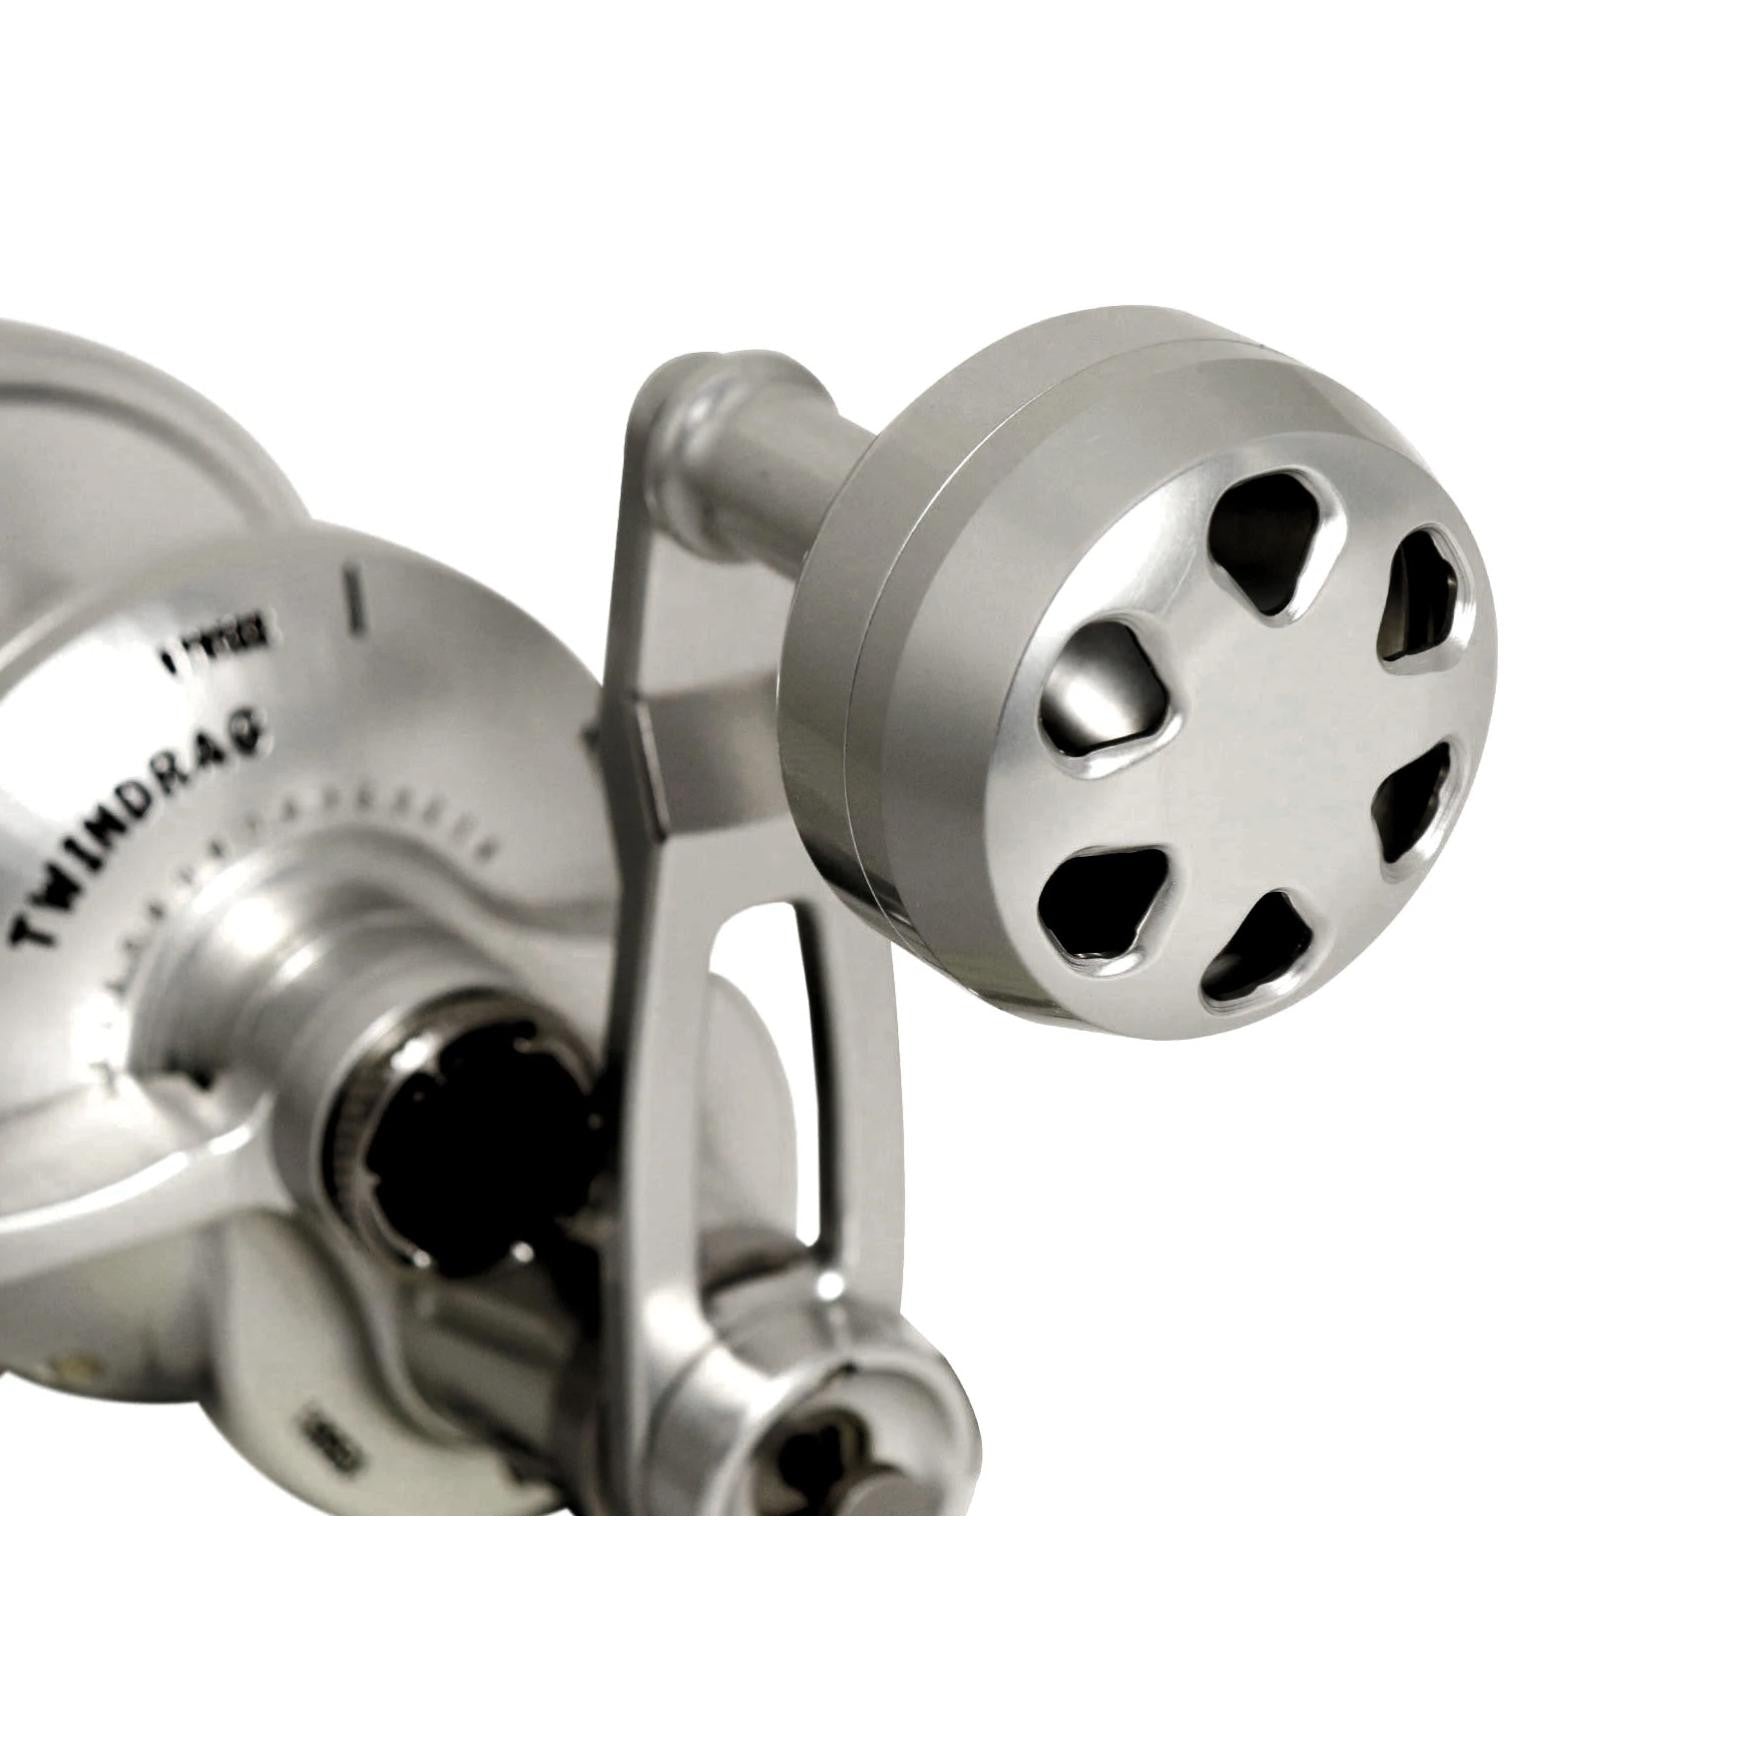 Accurate Valiant 2 Speed Lever Drag Reels